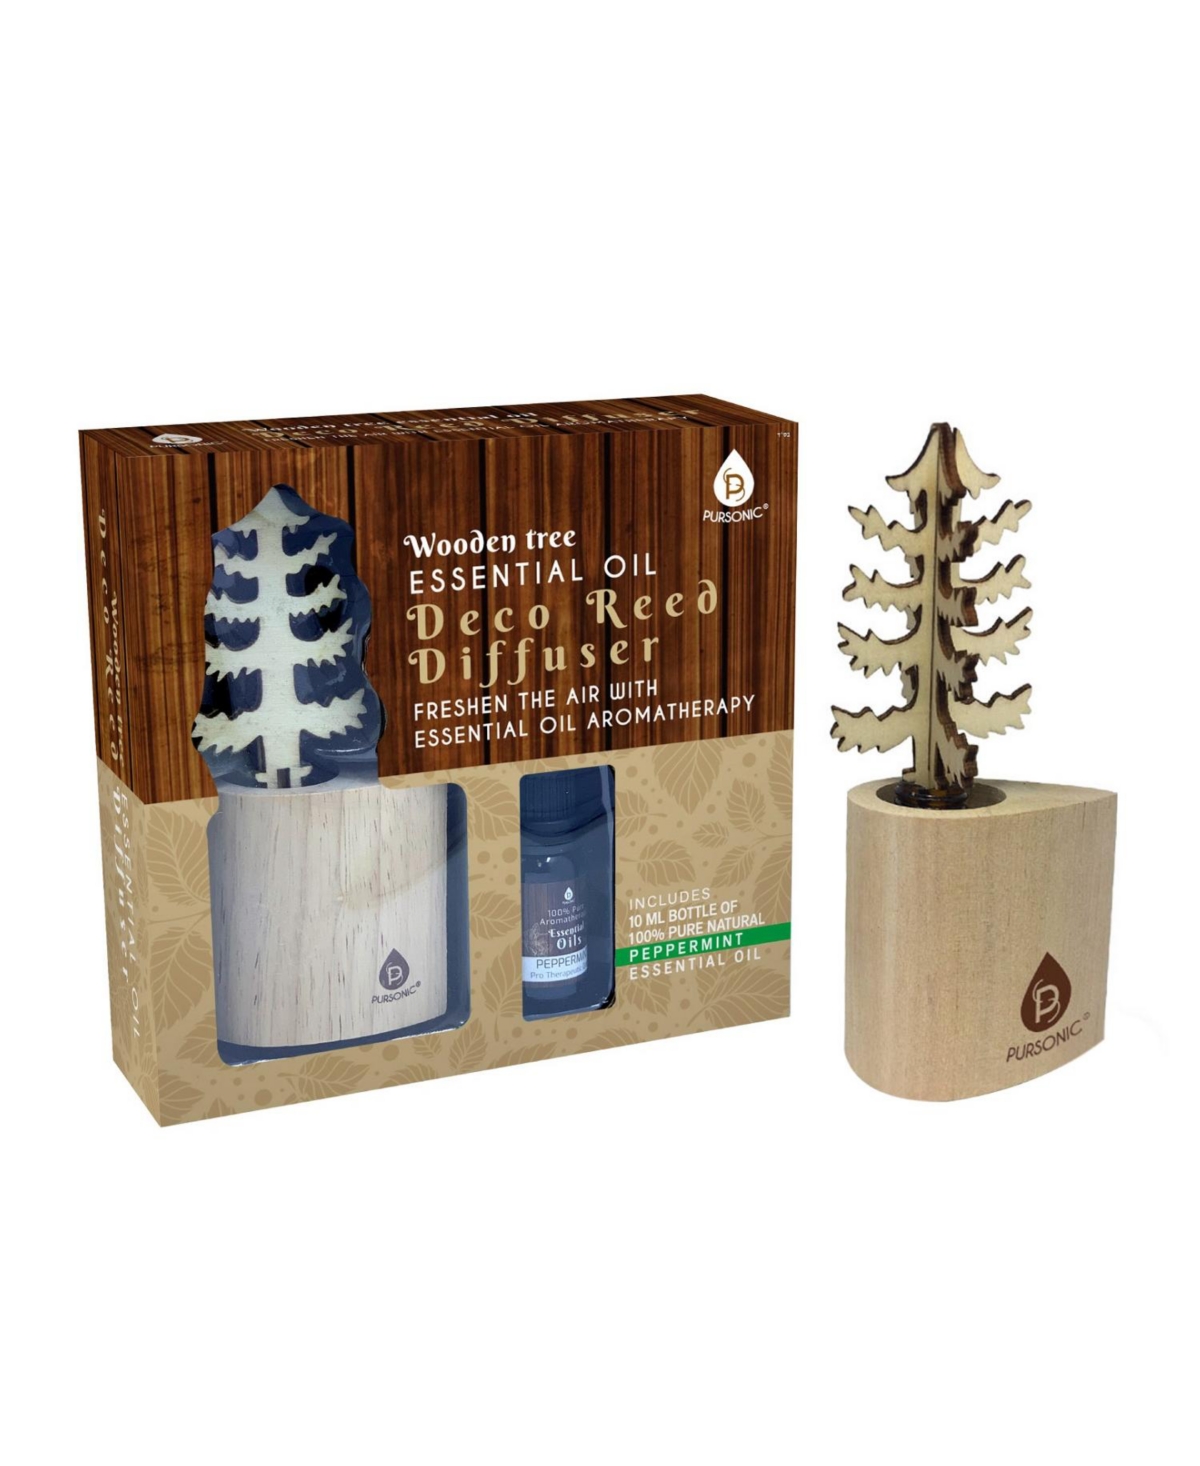 3D Wooden Standard Tree Reed Diffuser with Peppermint Essential Oil - Natural